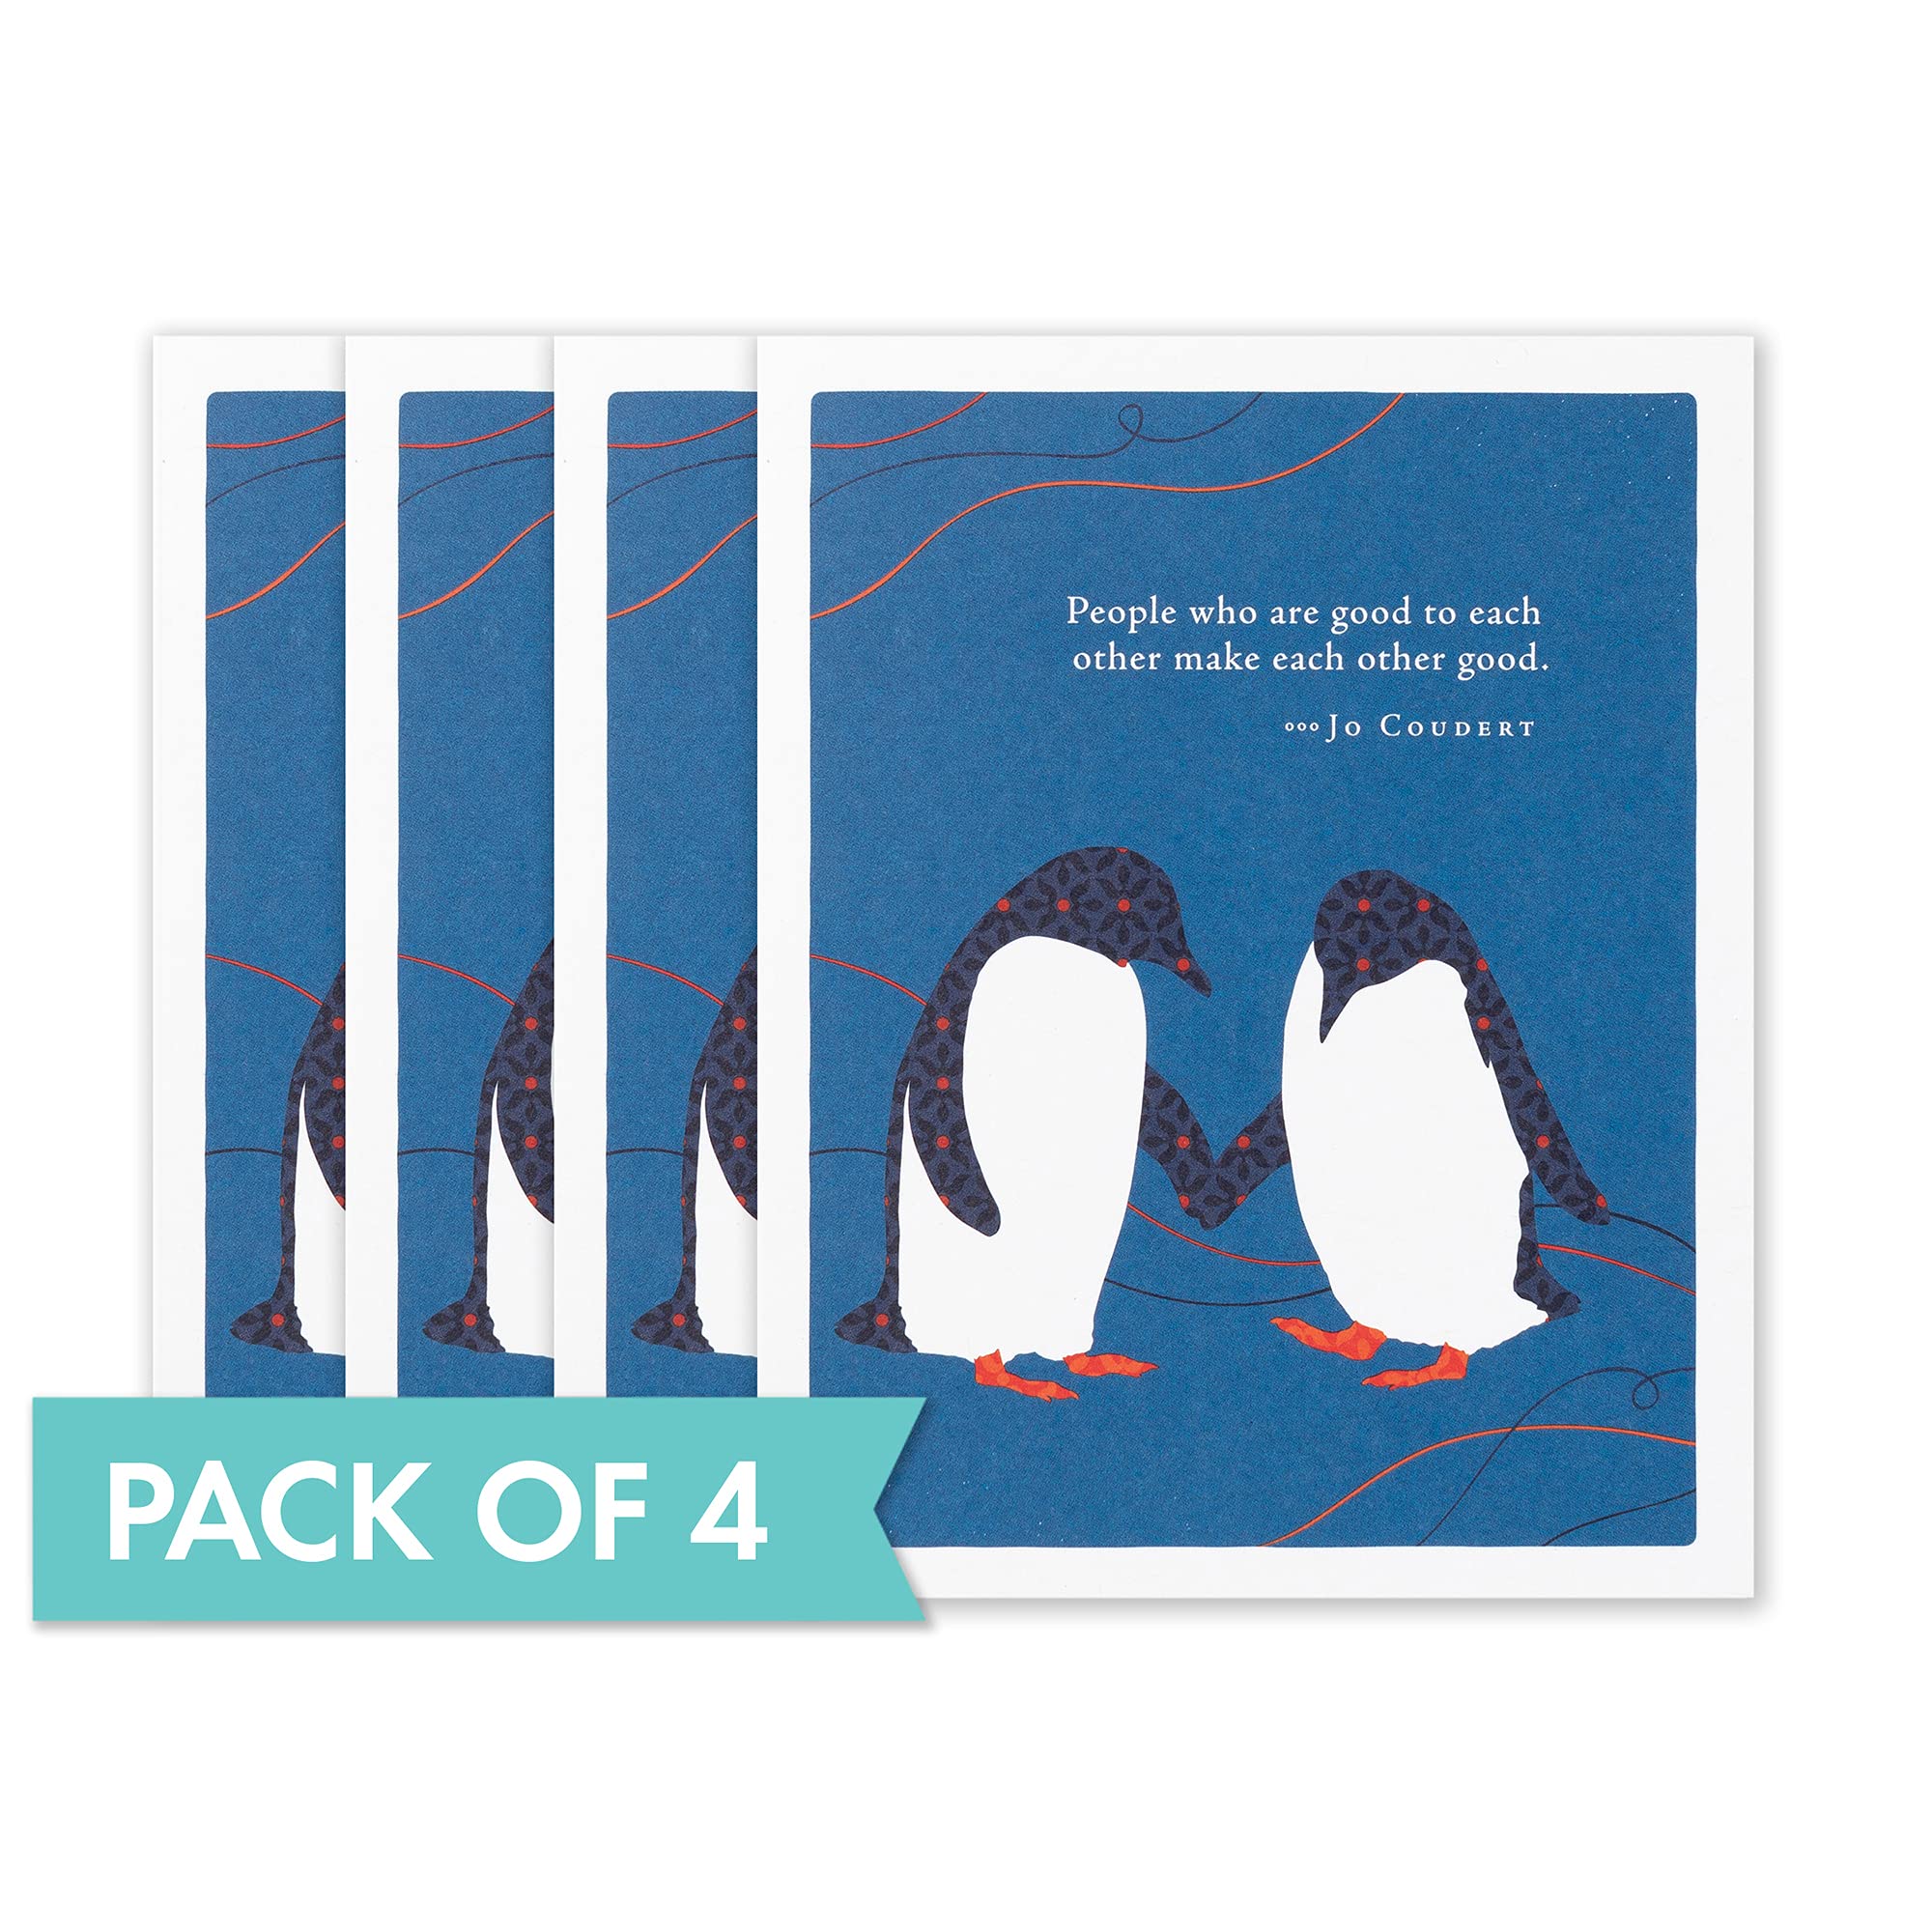 Compendium Positively Green 4-Pack of Thank You Cards – People who are good to each other make each other good (Four Cards Total, One Design, with Envelopes)